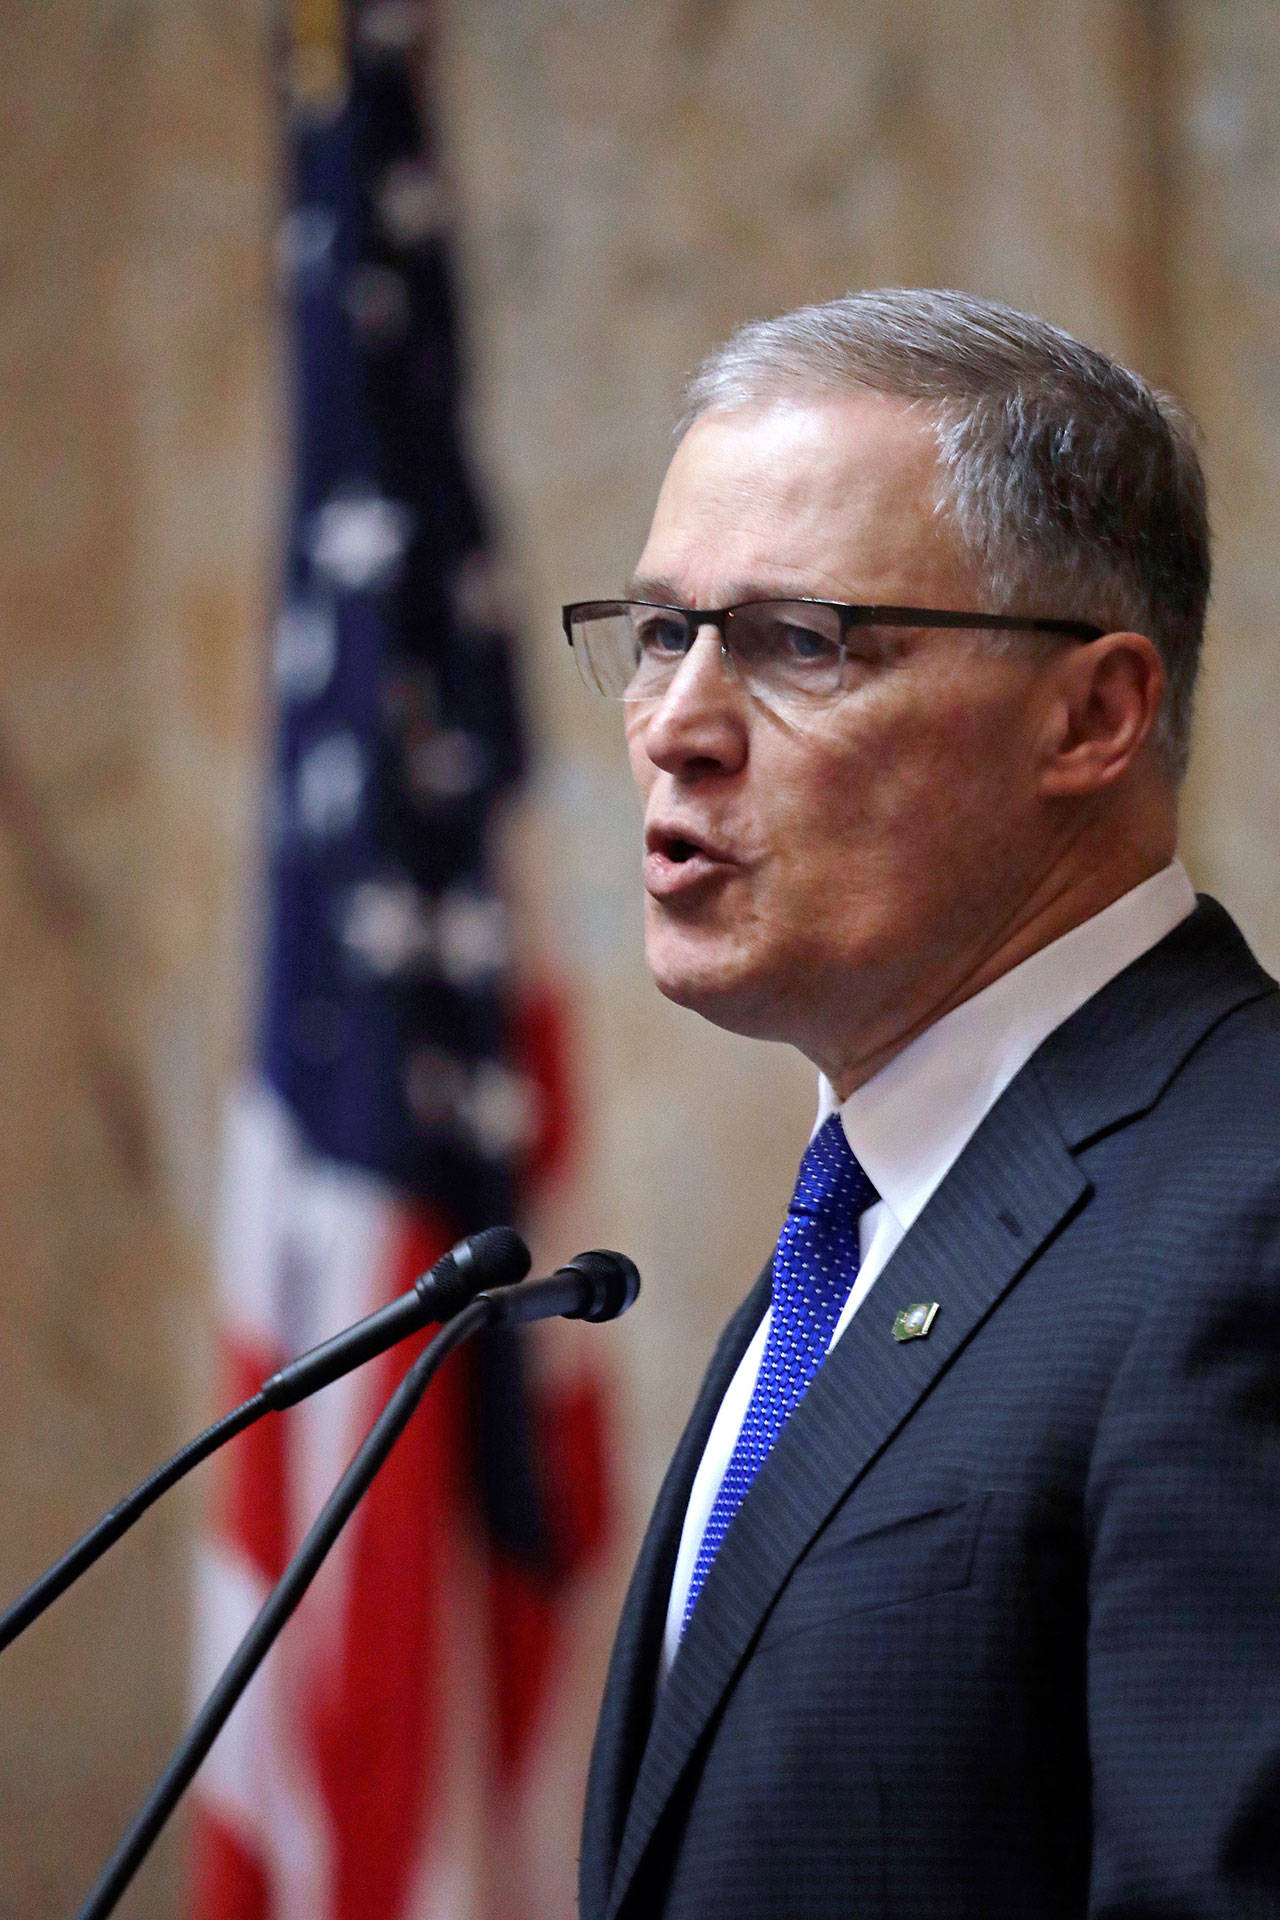 Gov. Jay Inslee speaks during his annual state of the state address before a joint legislative session Tuesday in Olympia. (Elaine Thompson/The Associated Press)